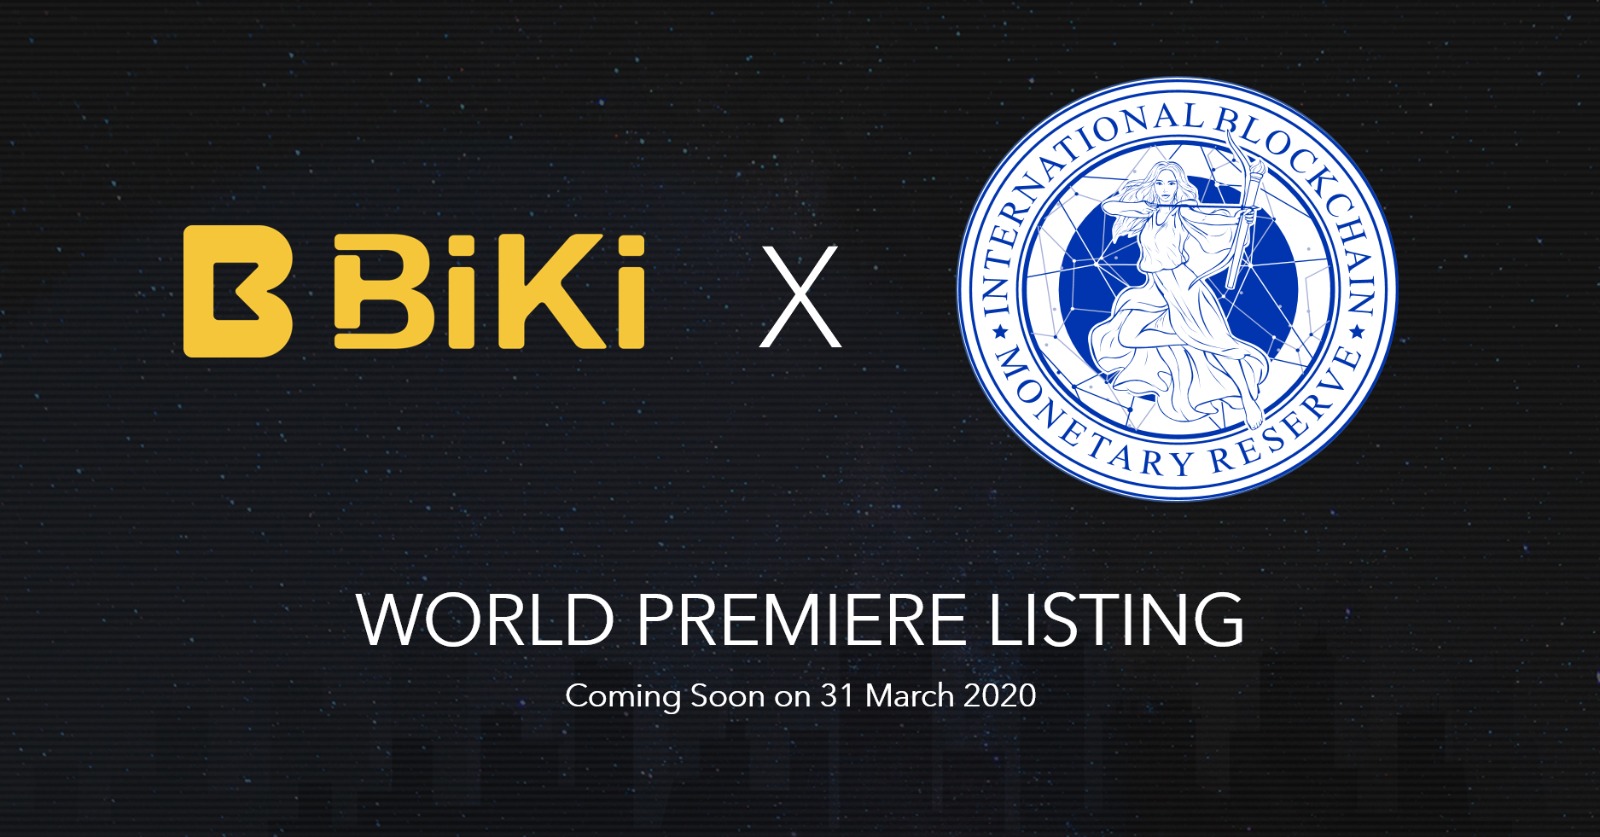 BiKi.com Announces World Premiere Listing of Asia Reserve Currency Coin (ARCC), World’s First Microasset